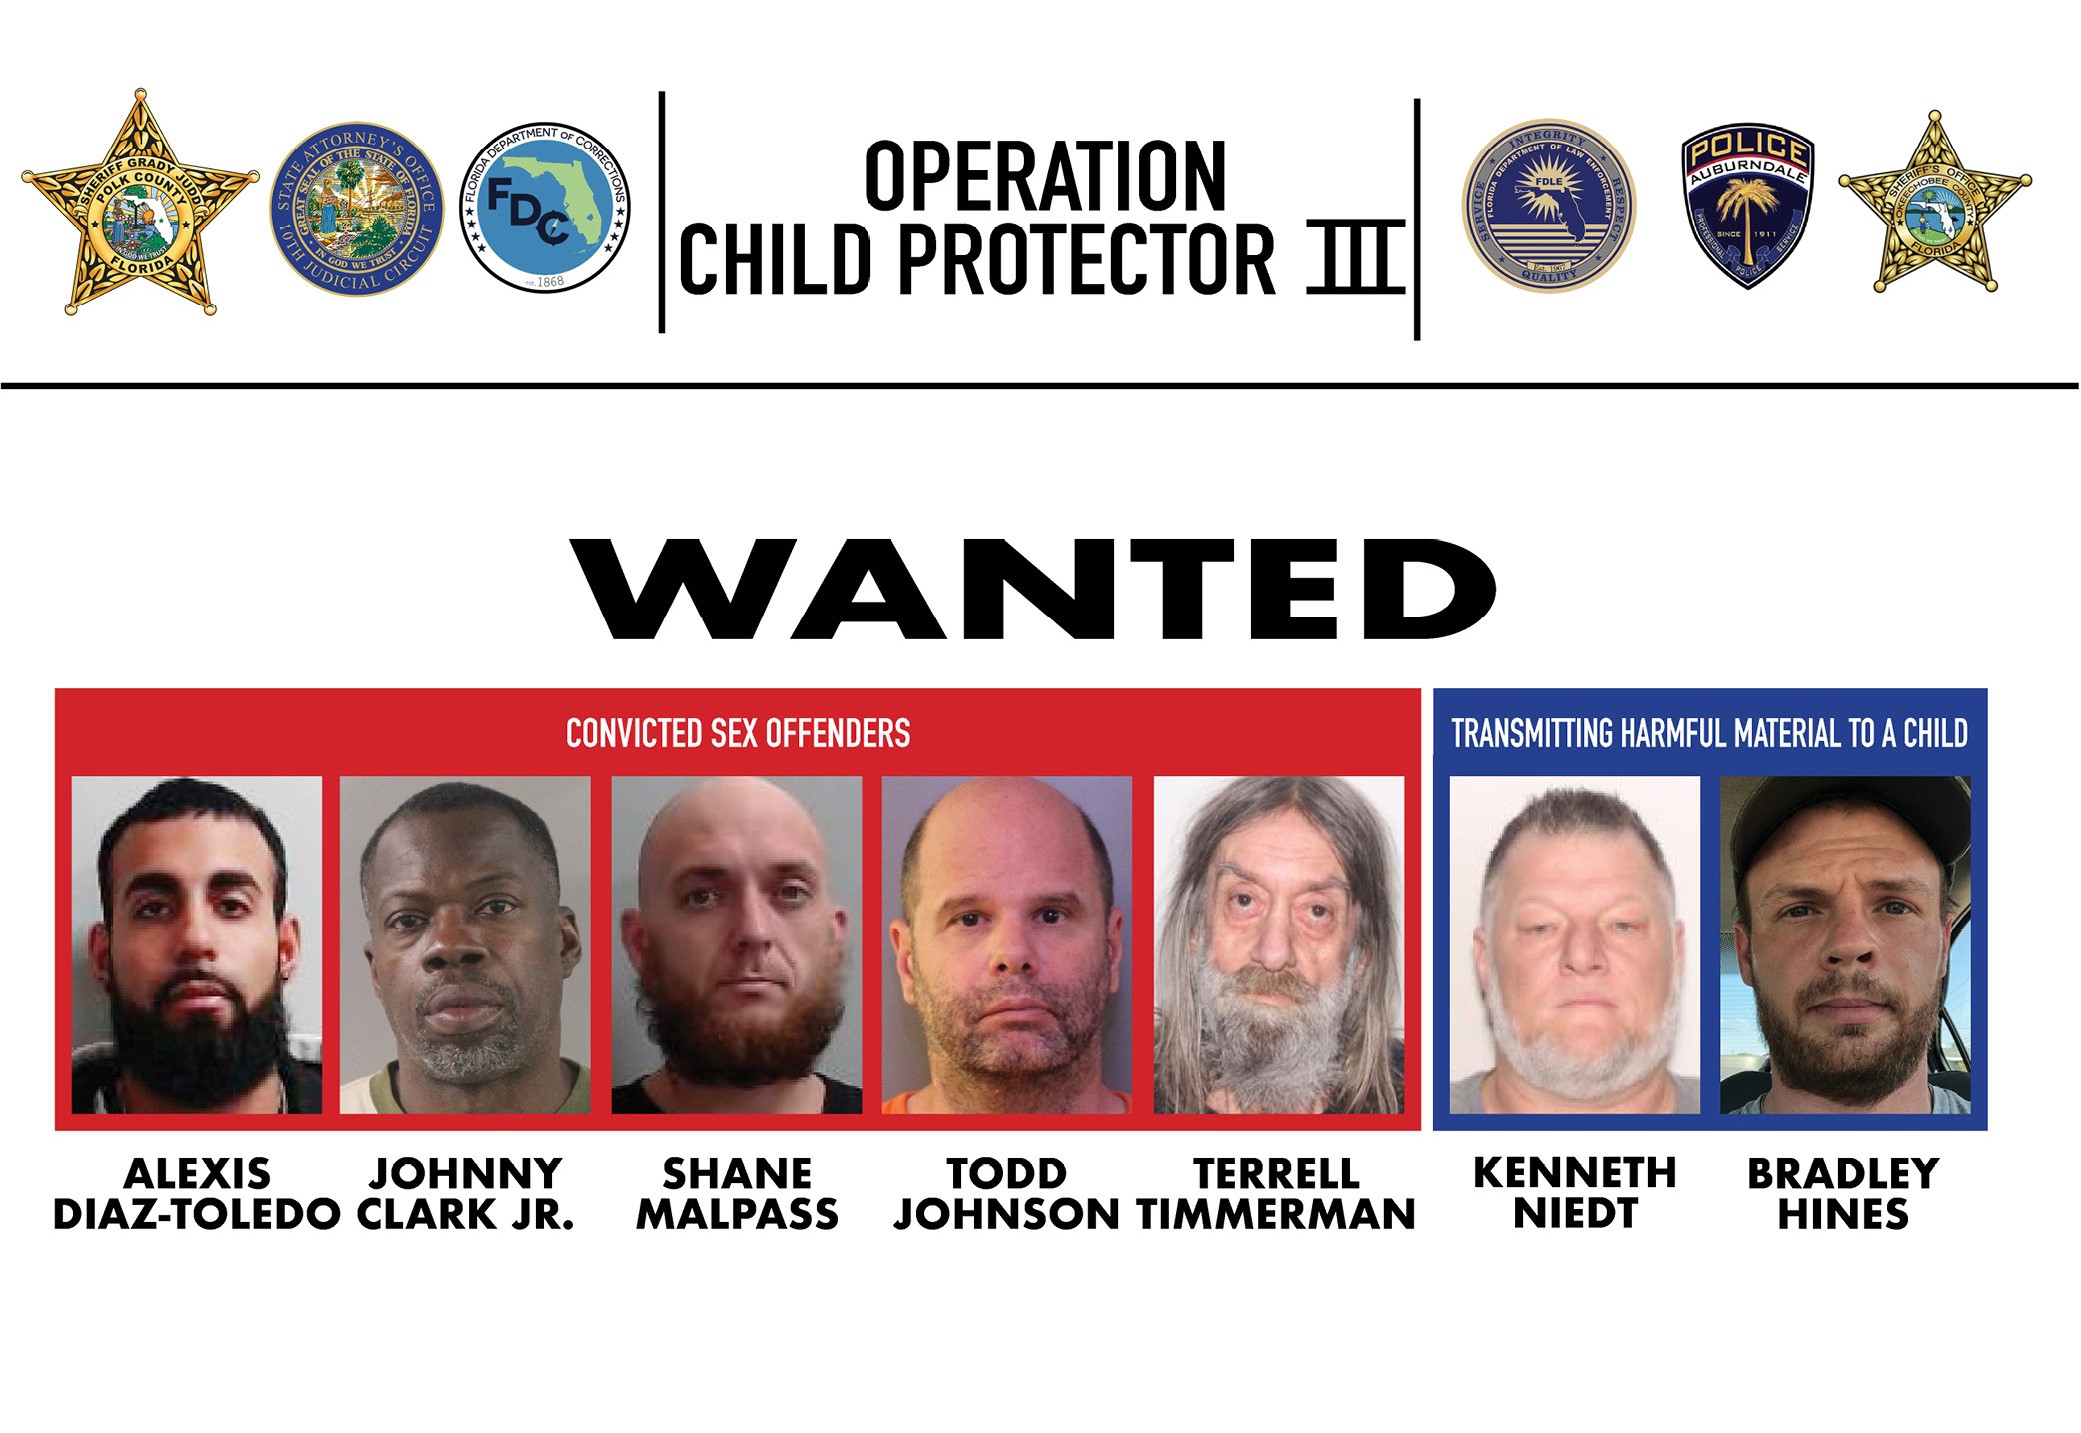 30 suspects arrested during investigation focused on protecting children from sexual offenders and predators picture